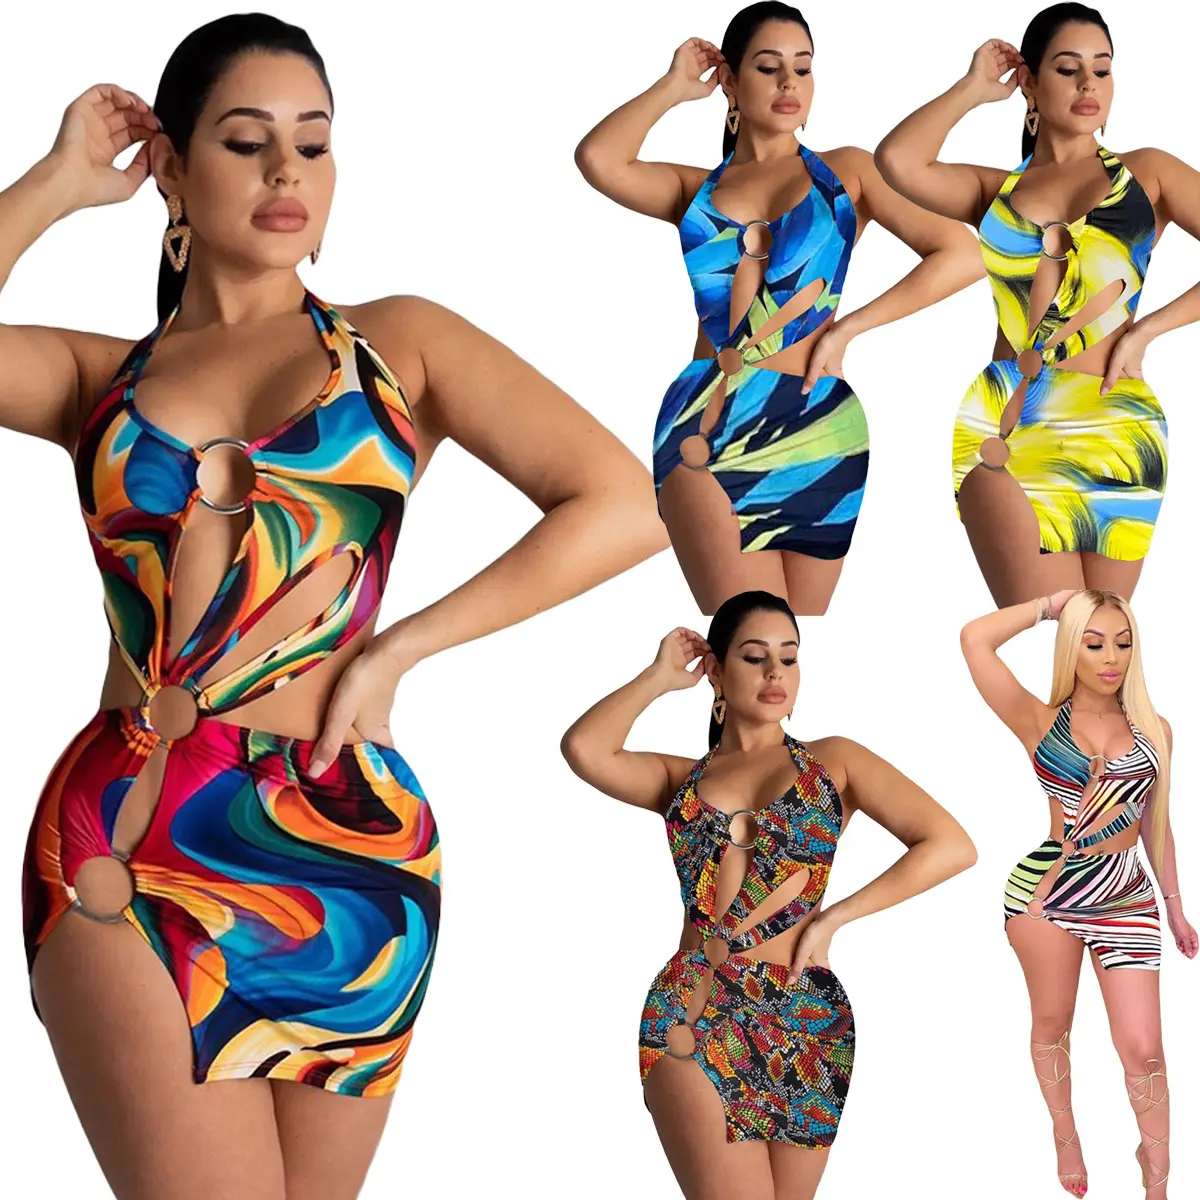 BN042 Swimming suit colorful printed dress Women Cover Up Beach Dress Swimsuit Beach Cover Up